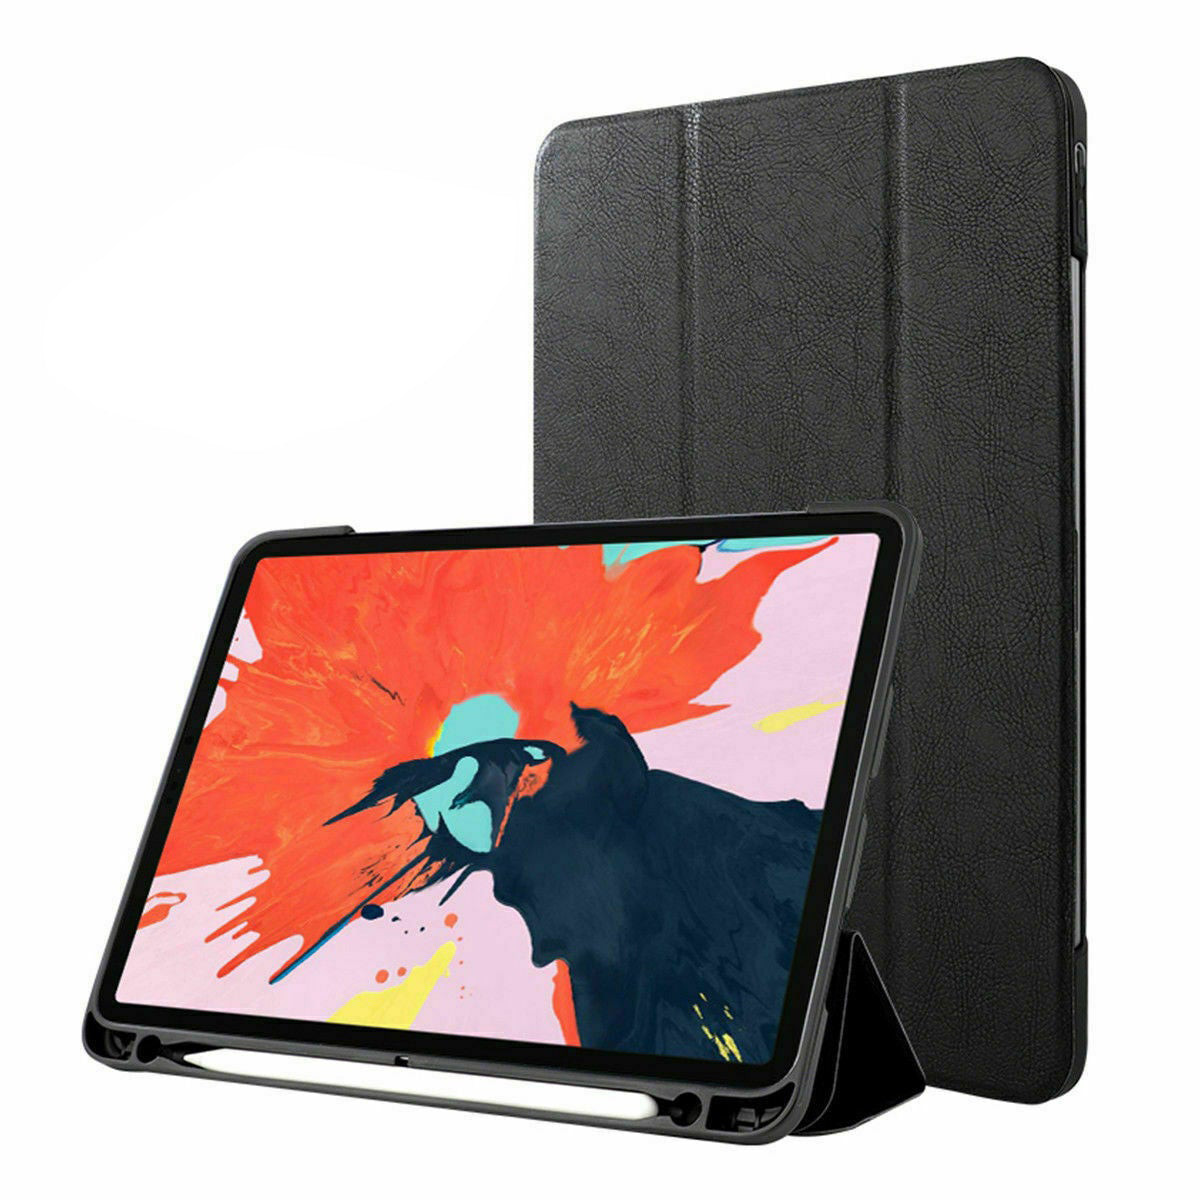 Copy of iPad Pro 9.7 ''10.5 ''11" 12.9'' 2017 2018 2020 Magnet PU Leather Smart Case Cover Sup Pencil Charging